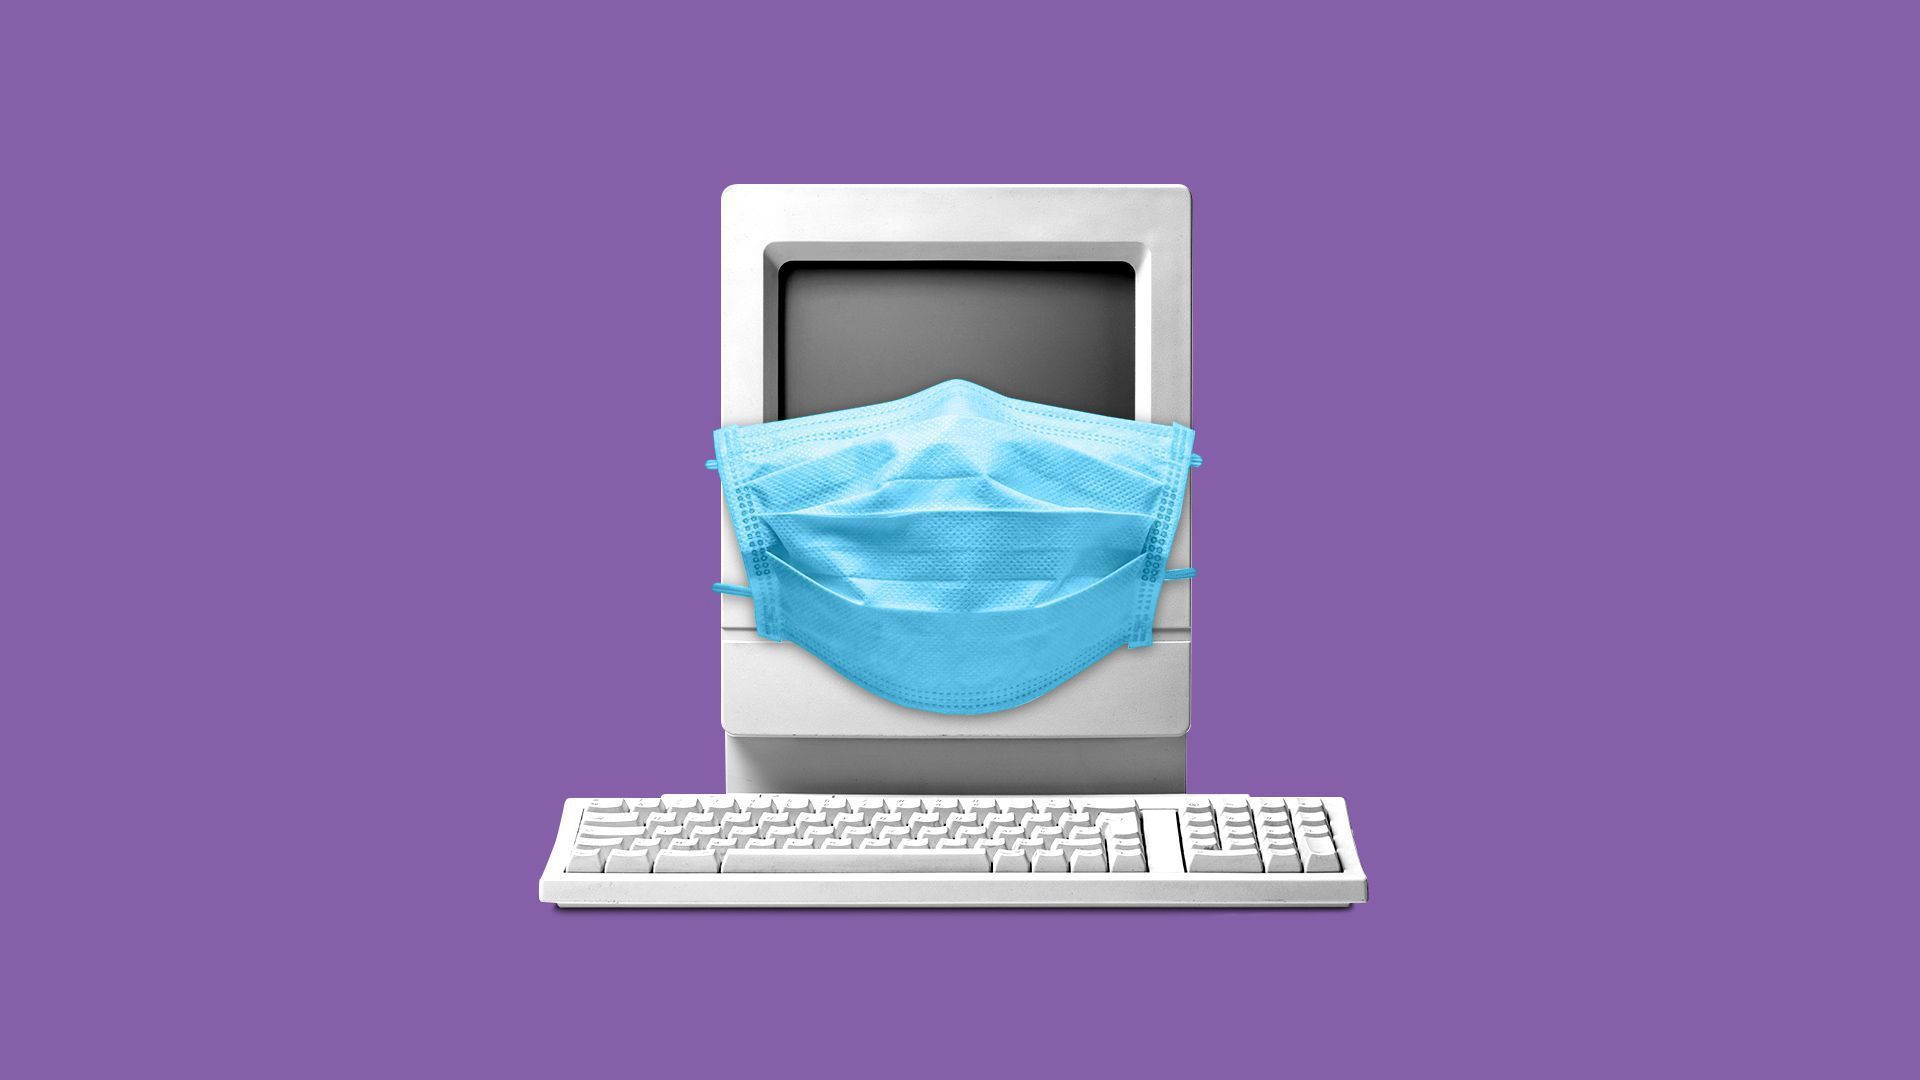 An illustration of a computer wearing a surgical mask